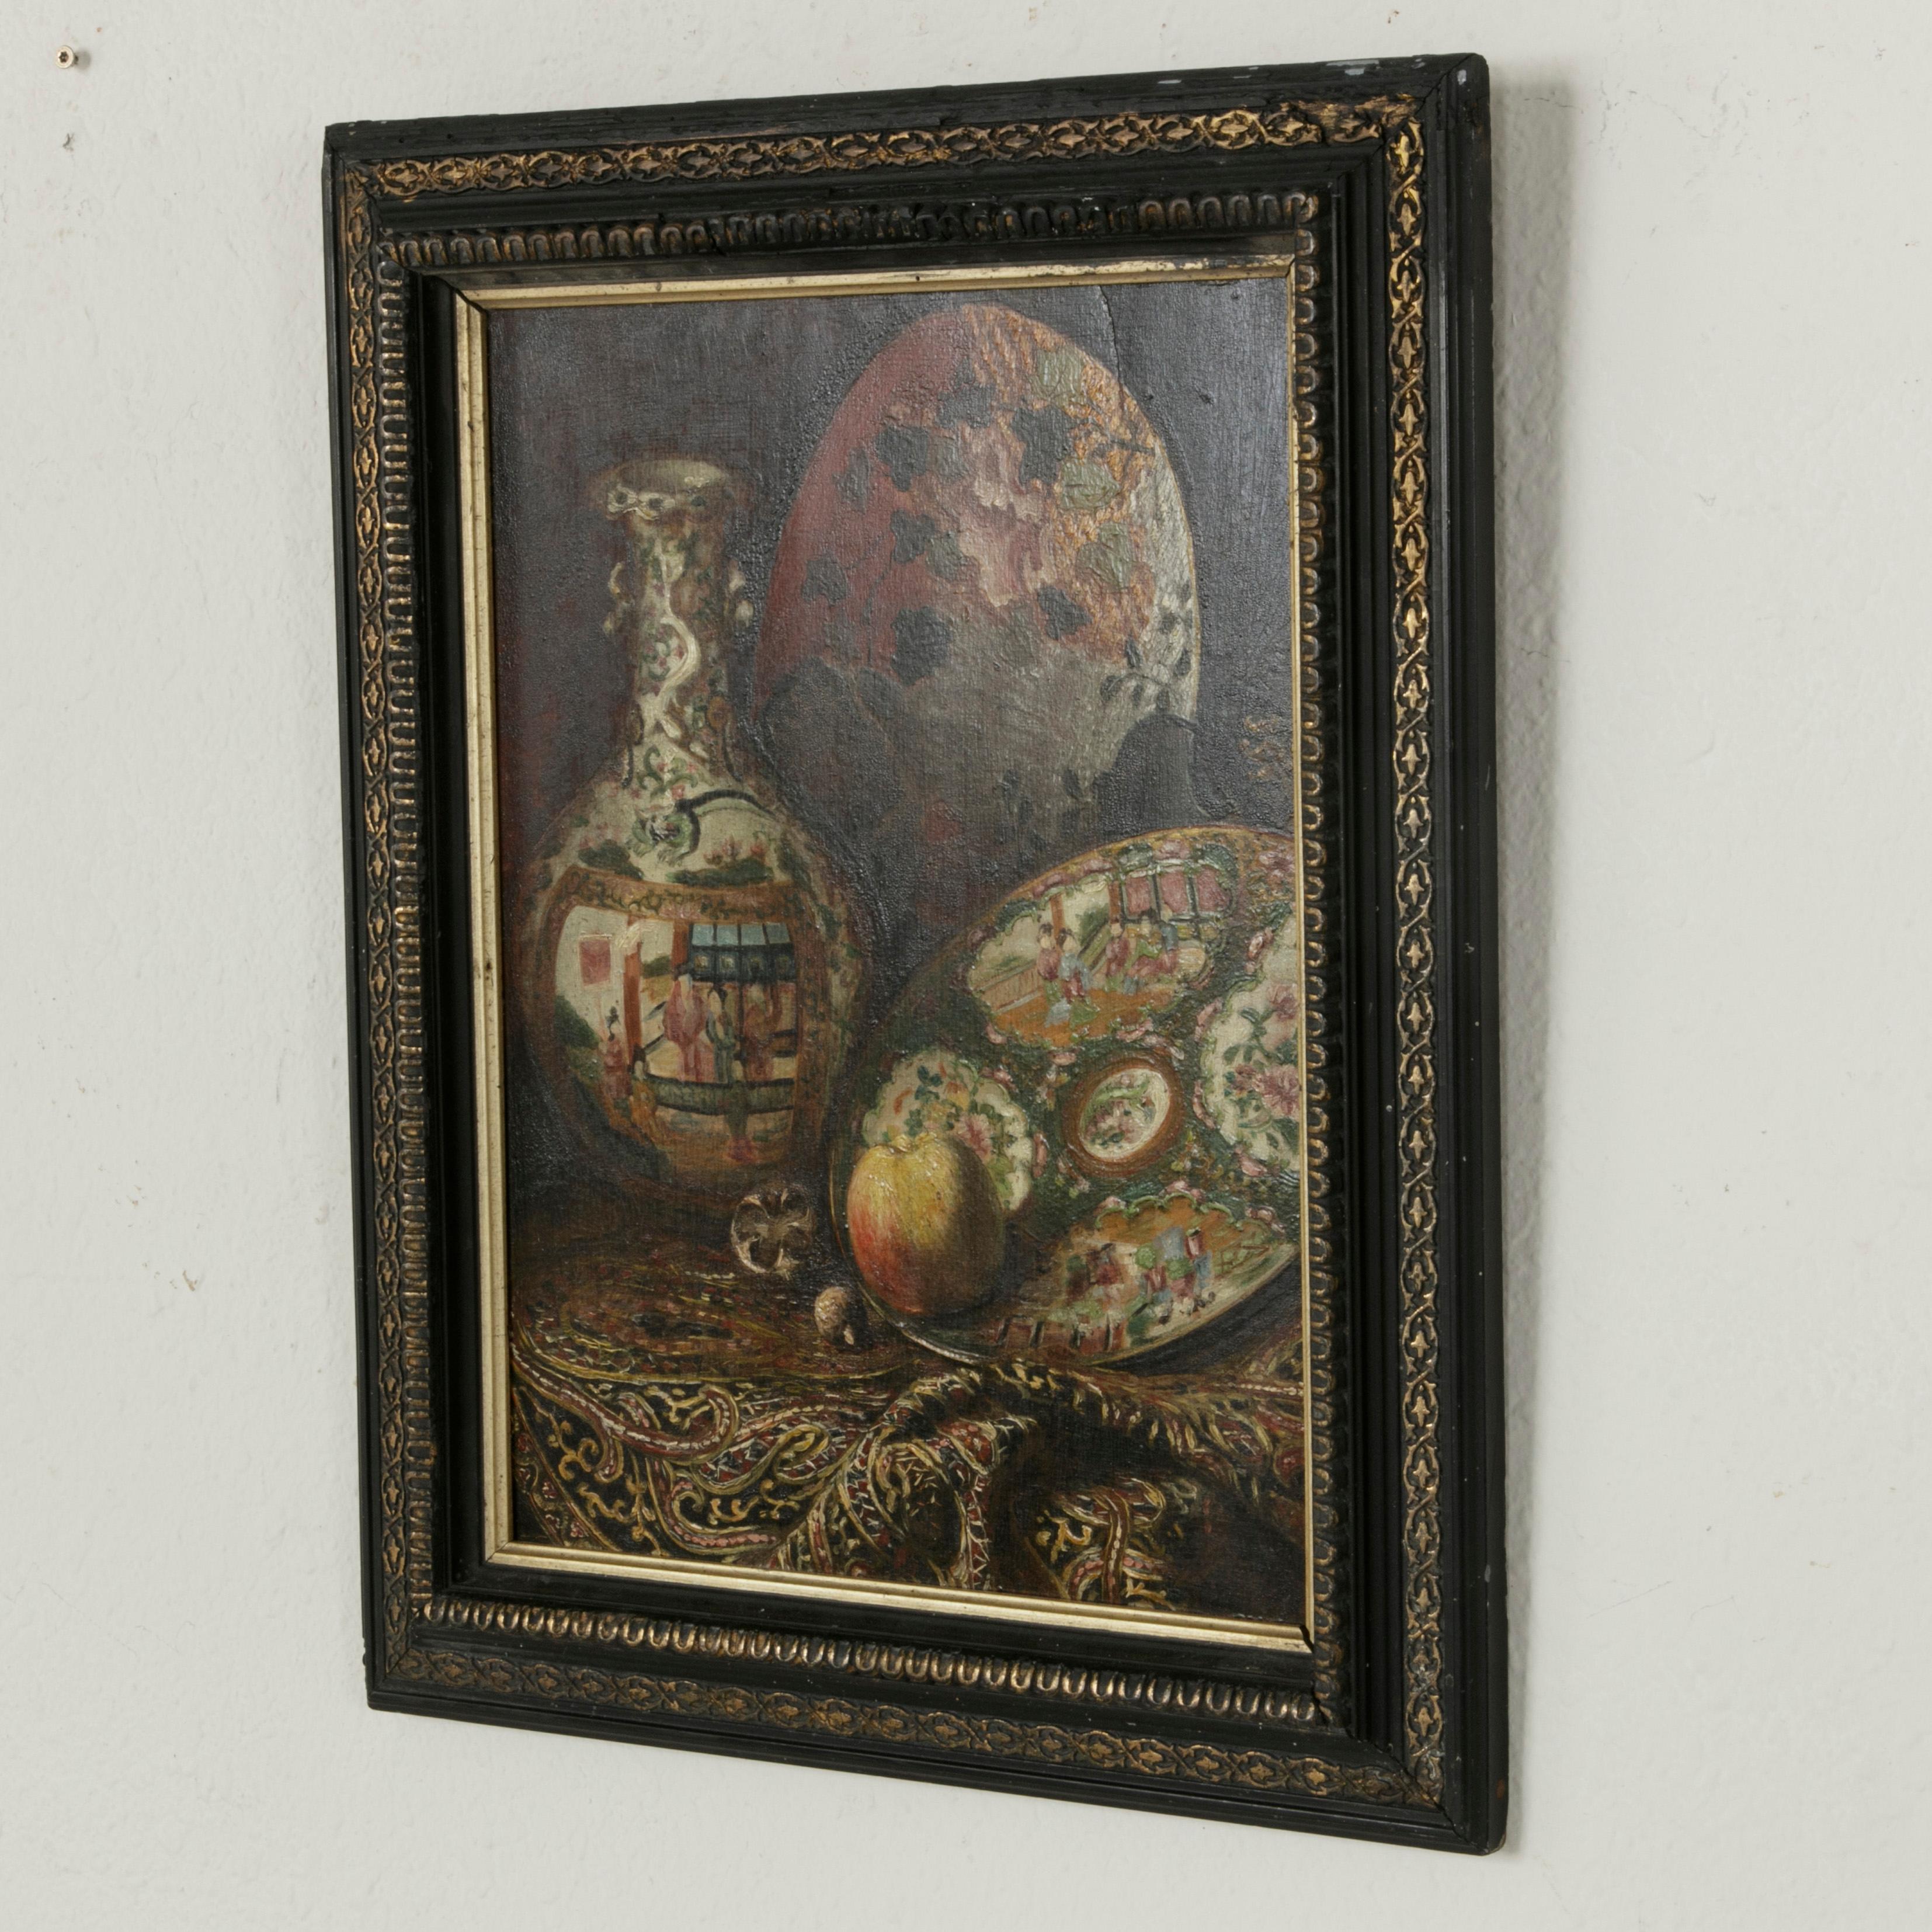 This late 19th century French Napoleon III period oil on panel painting features an orientalist still life with hand painted faience. An apple rests on the plate in the foreground and a fan detailed with leaves and flowers can be seen in the